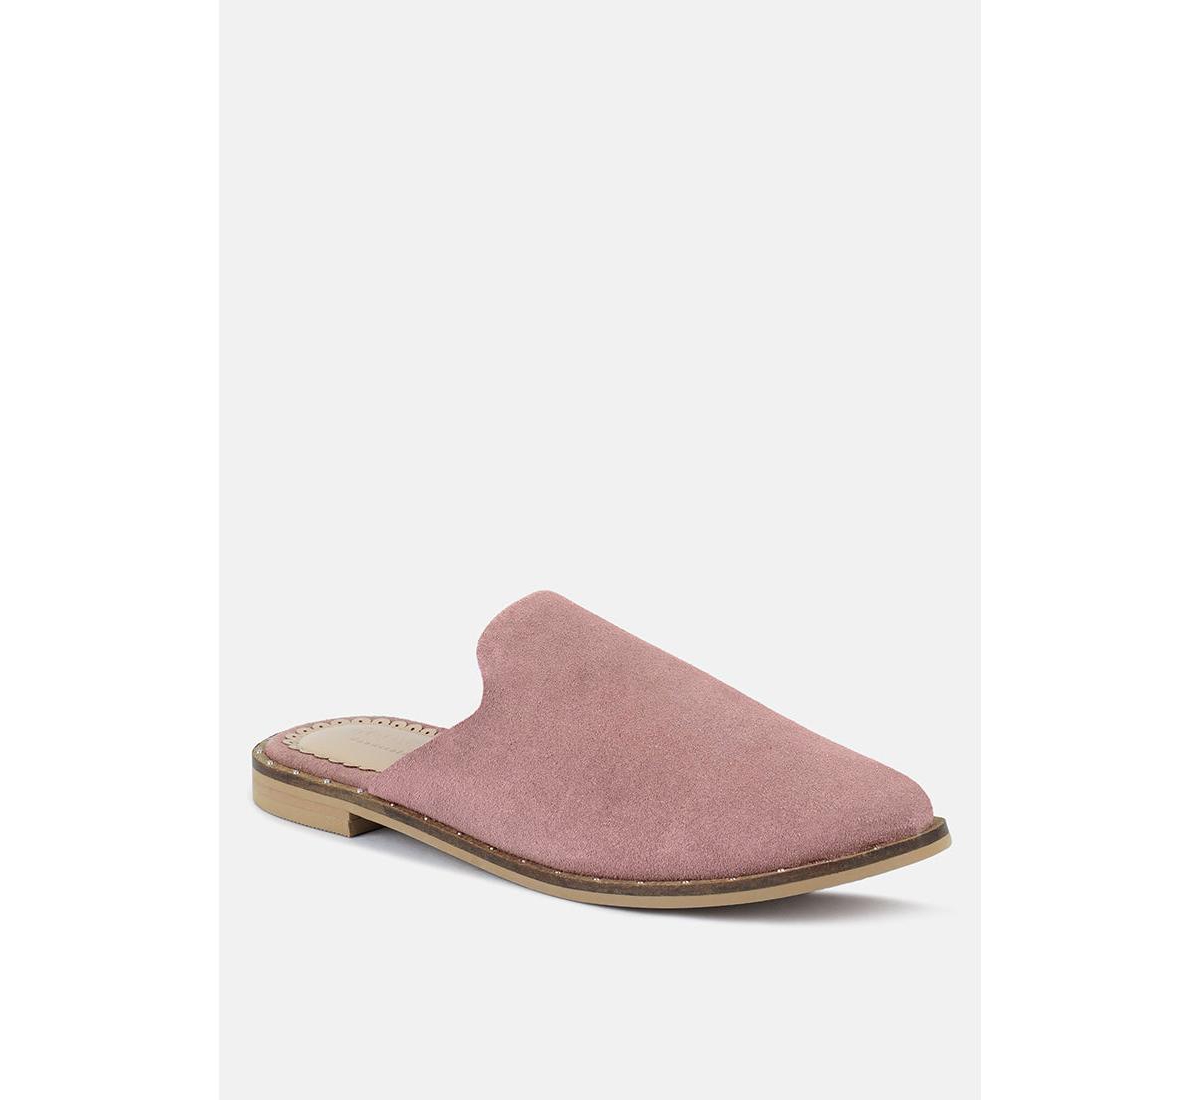 RAG & CO LIA WOMENS HANDCRAFTED CANVAS MULES